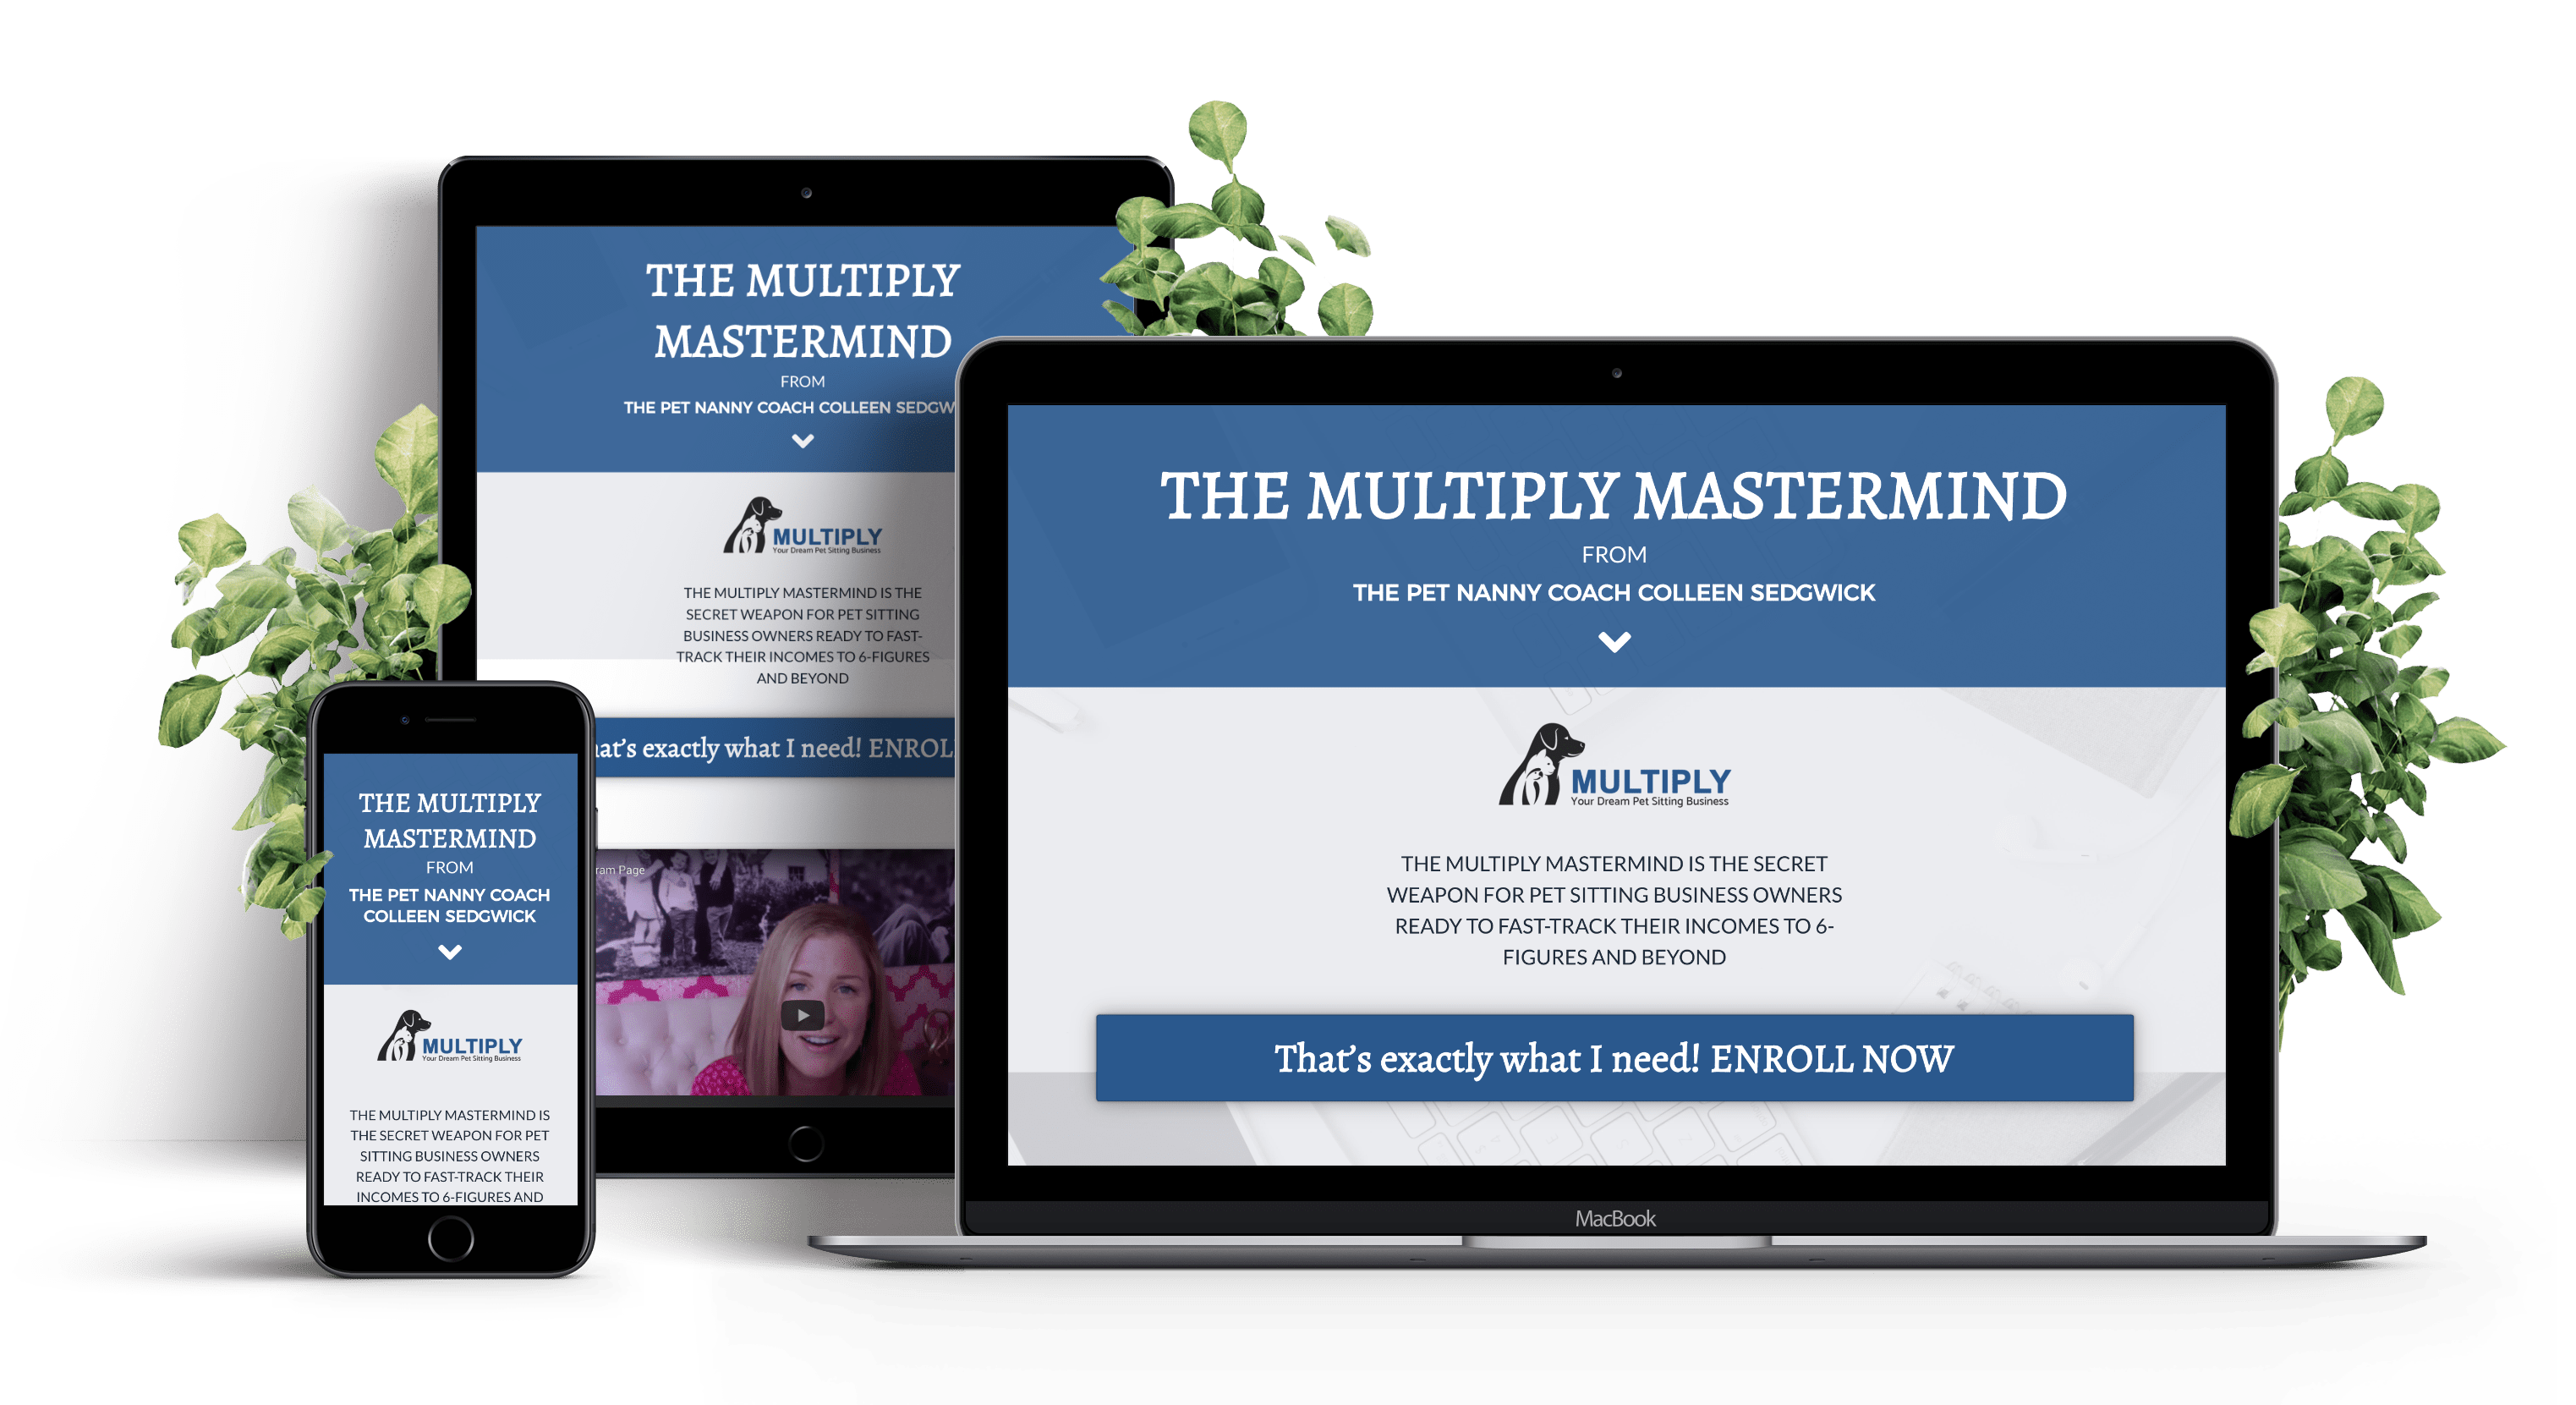 The Multiply Mastermind – Long Sales Form